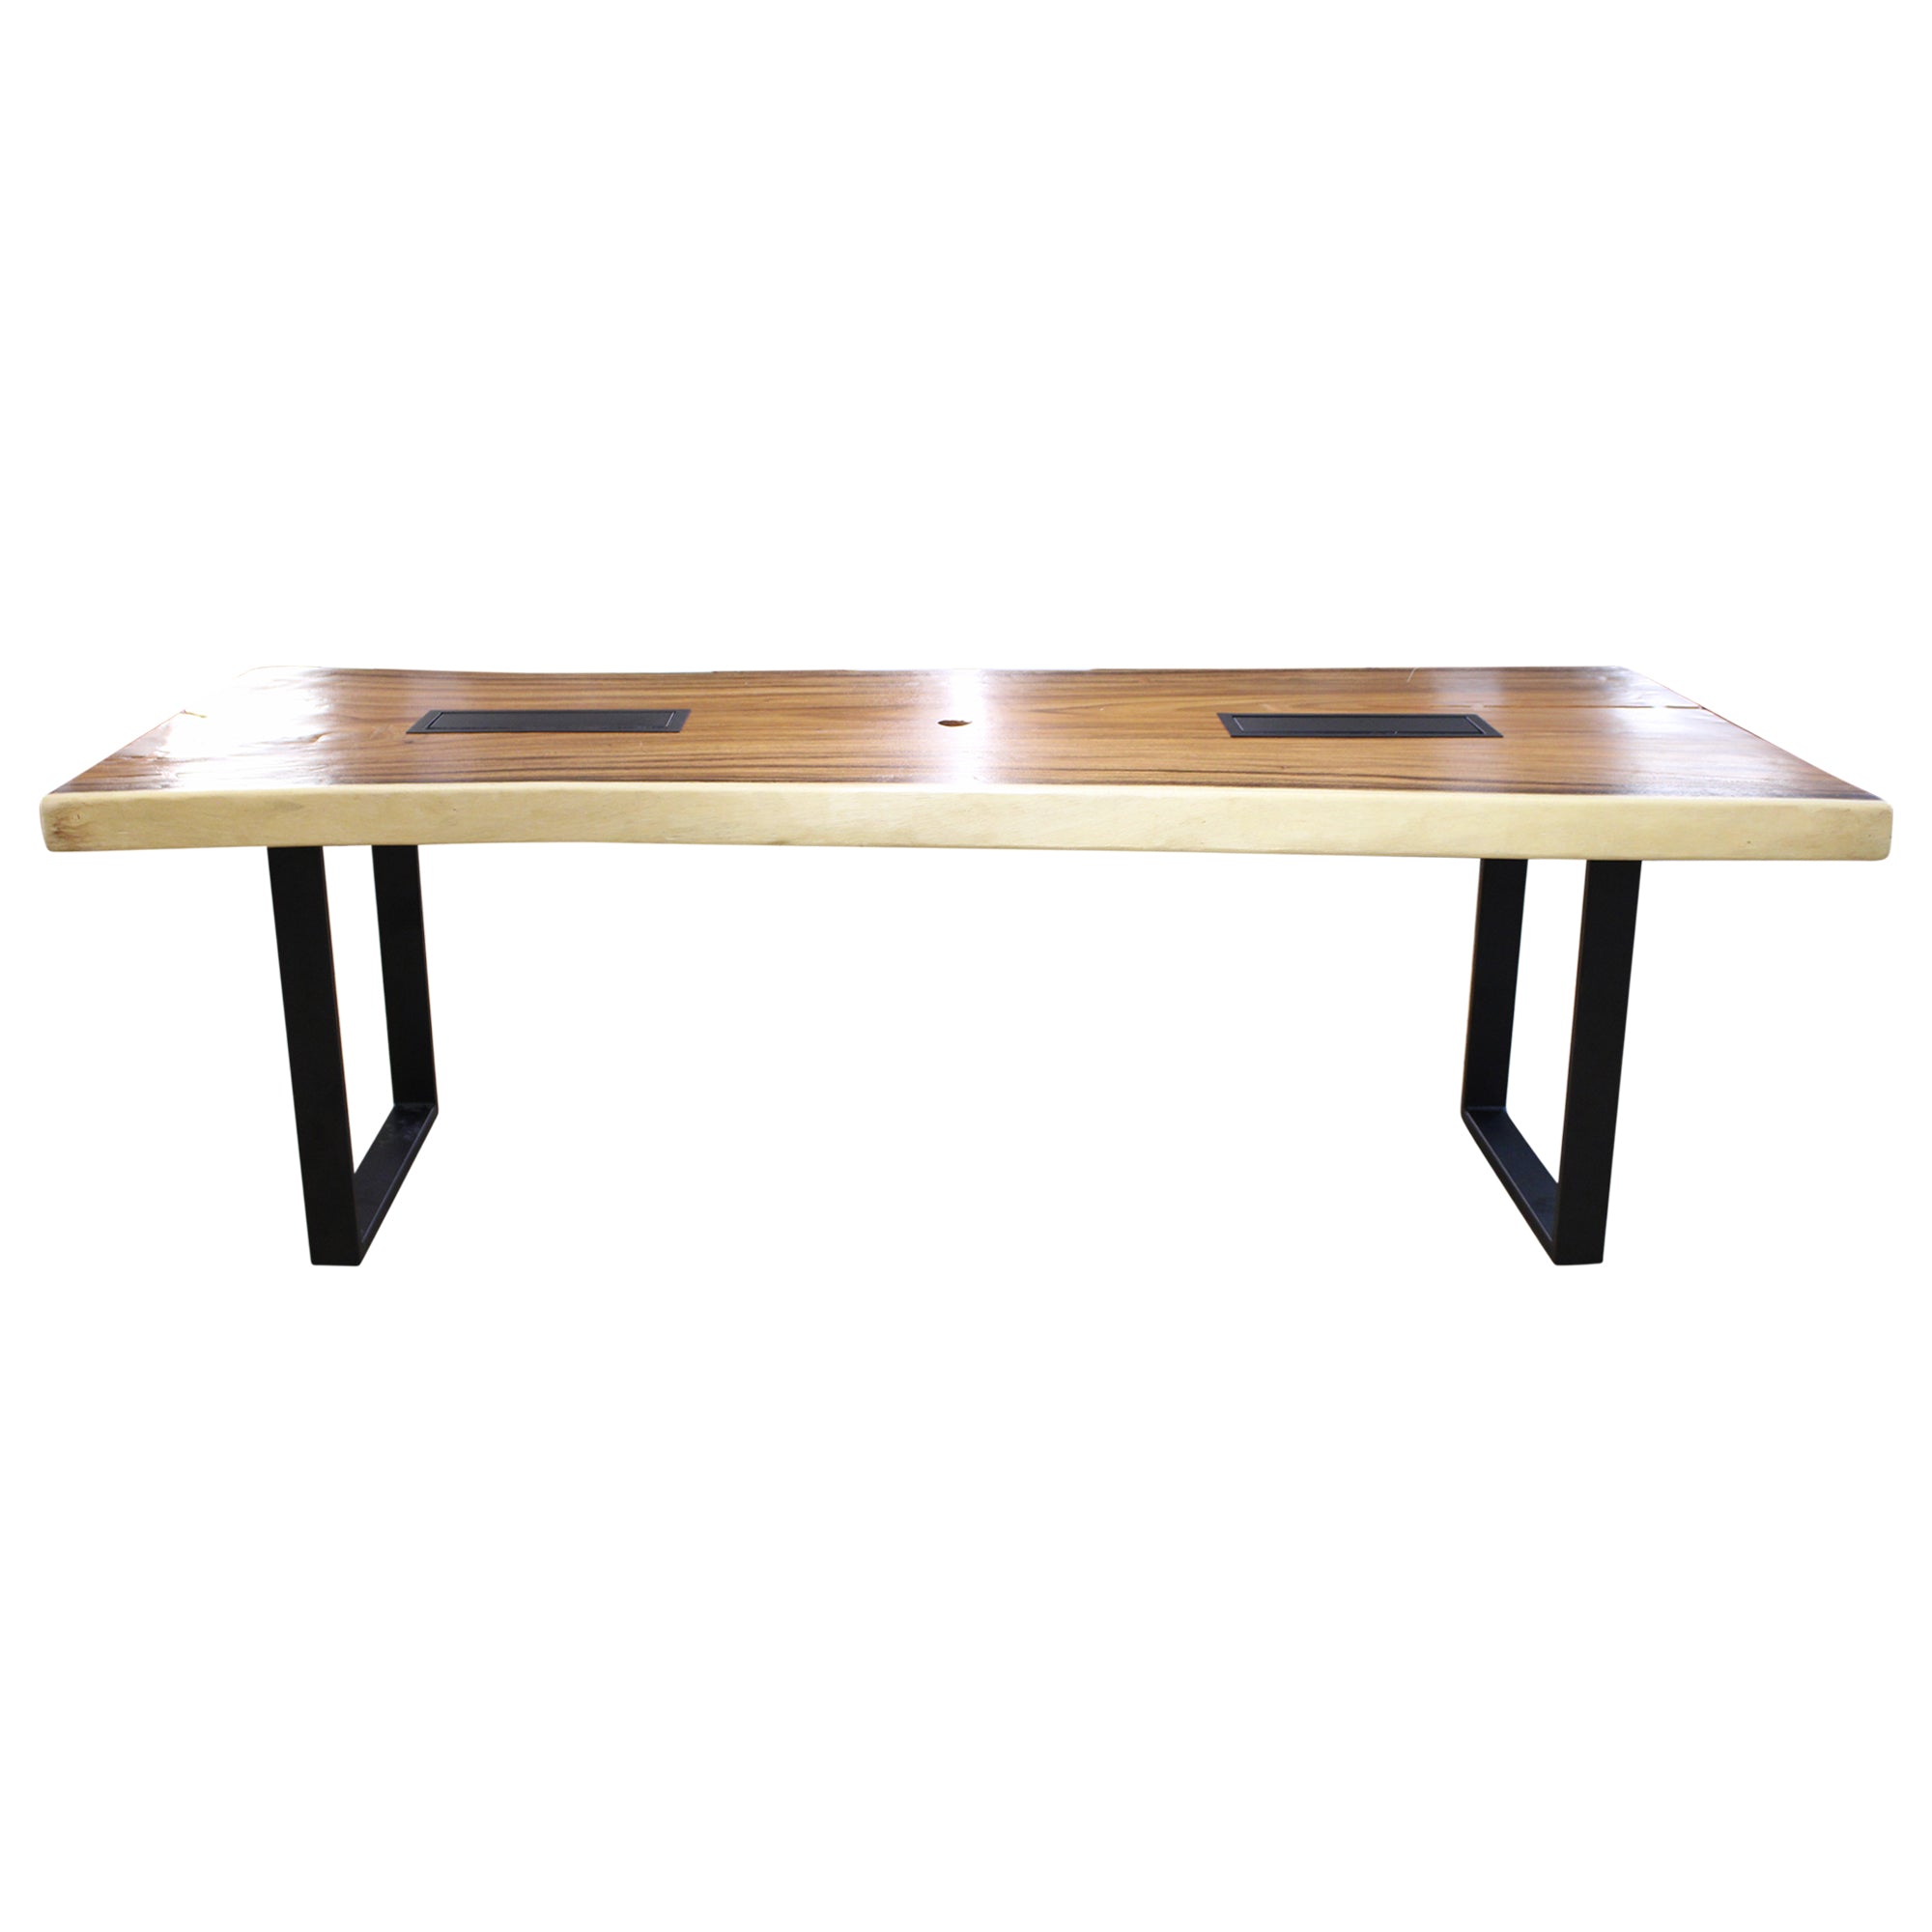 Darran Grove Live Edge Conference Table - Preowned